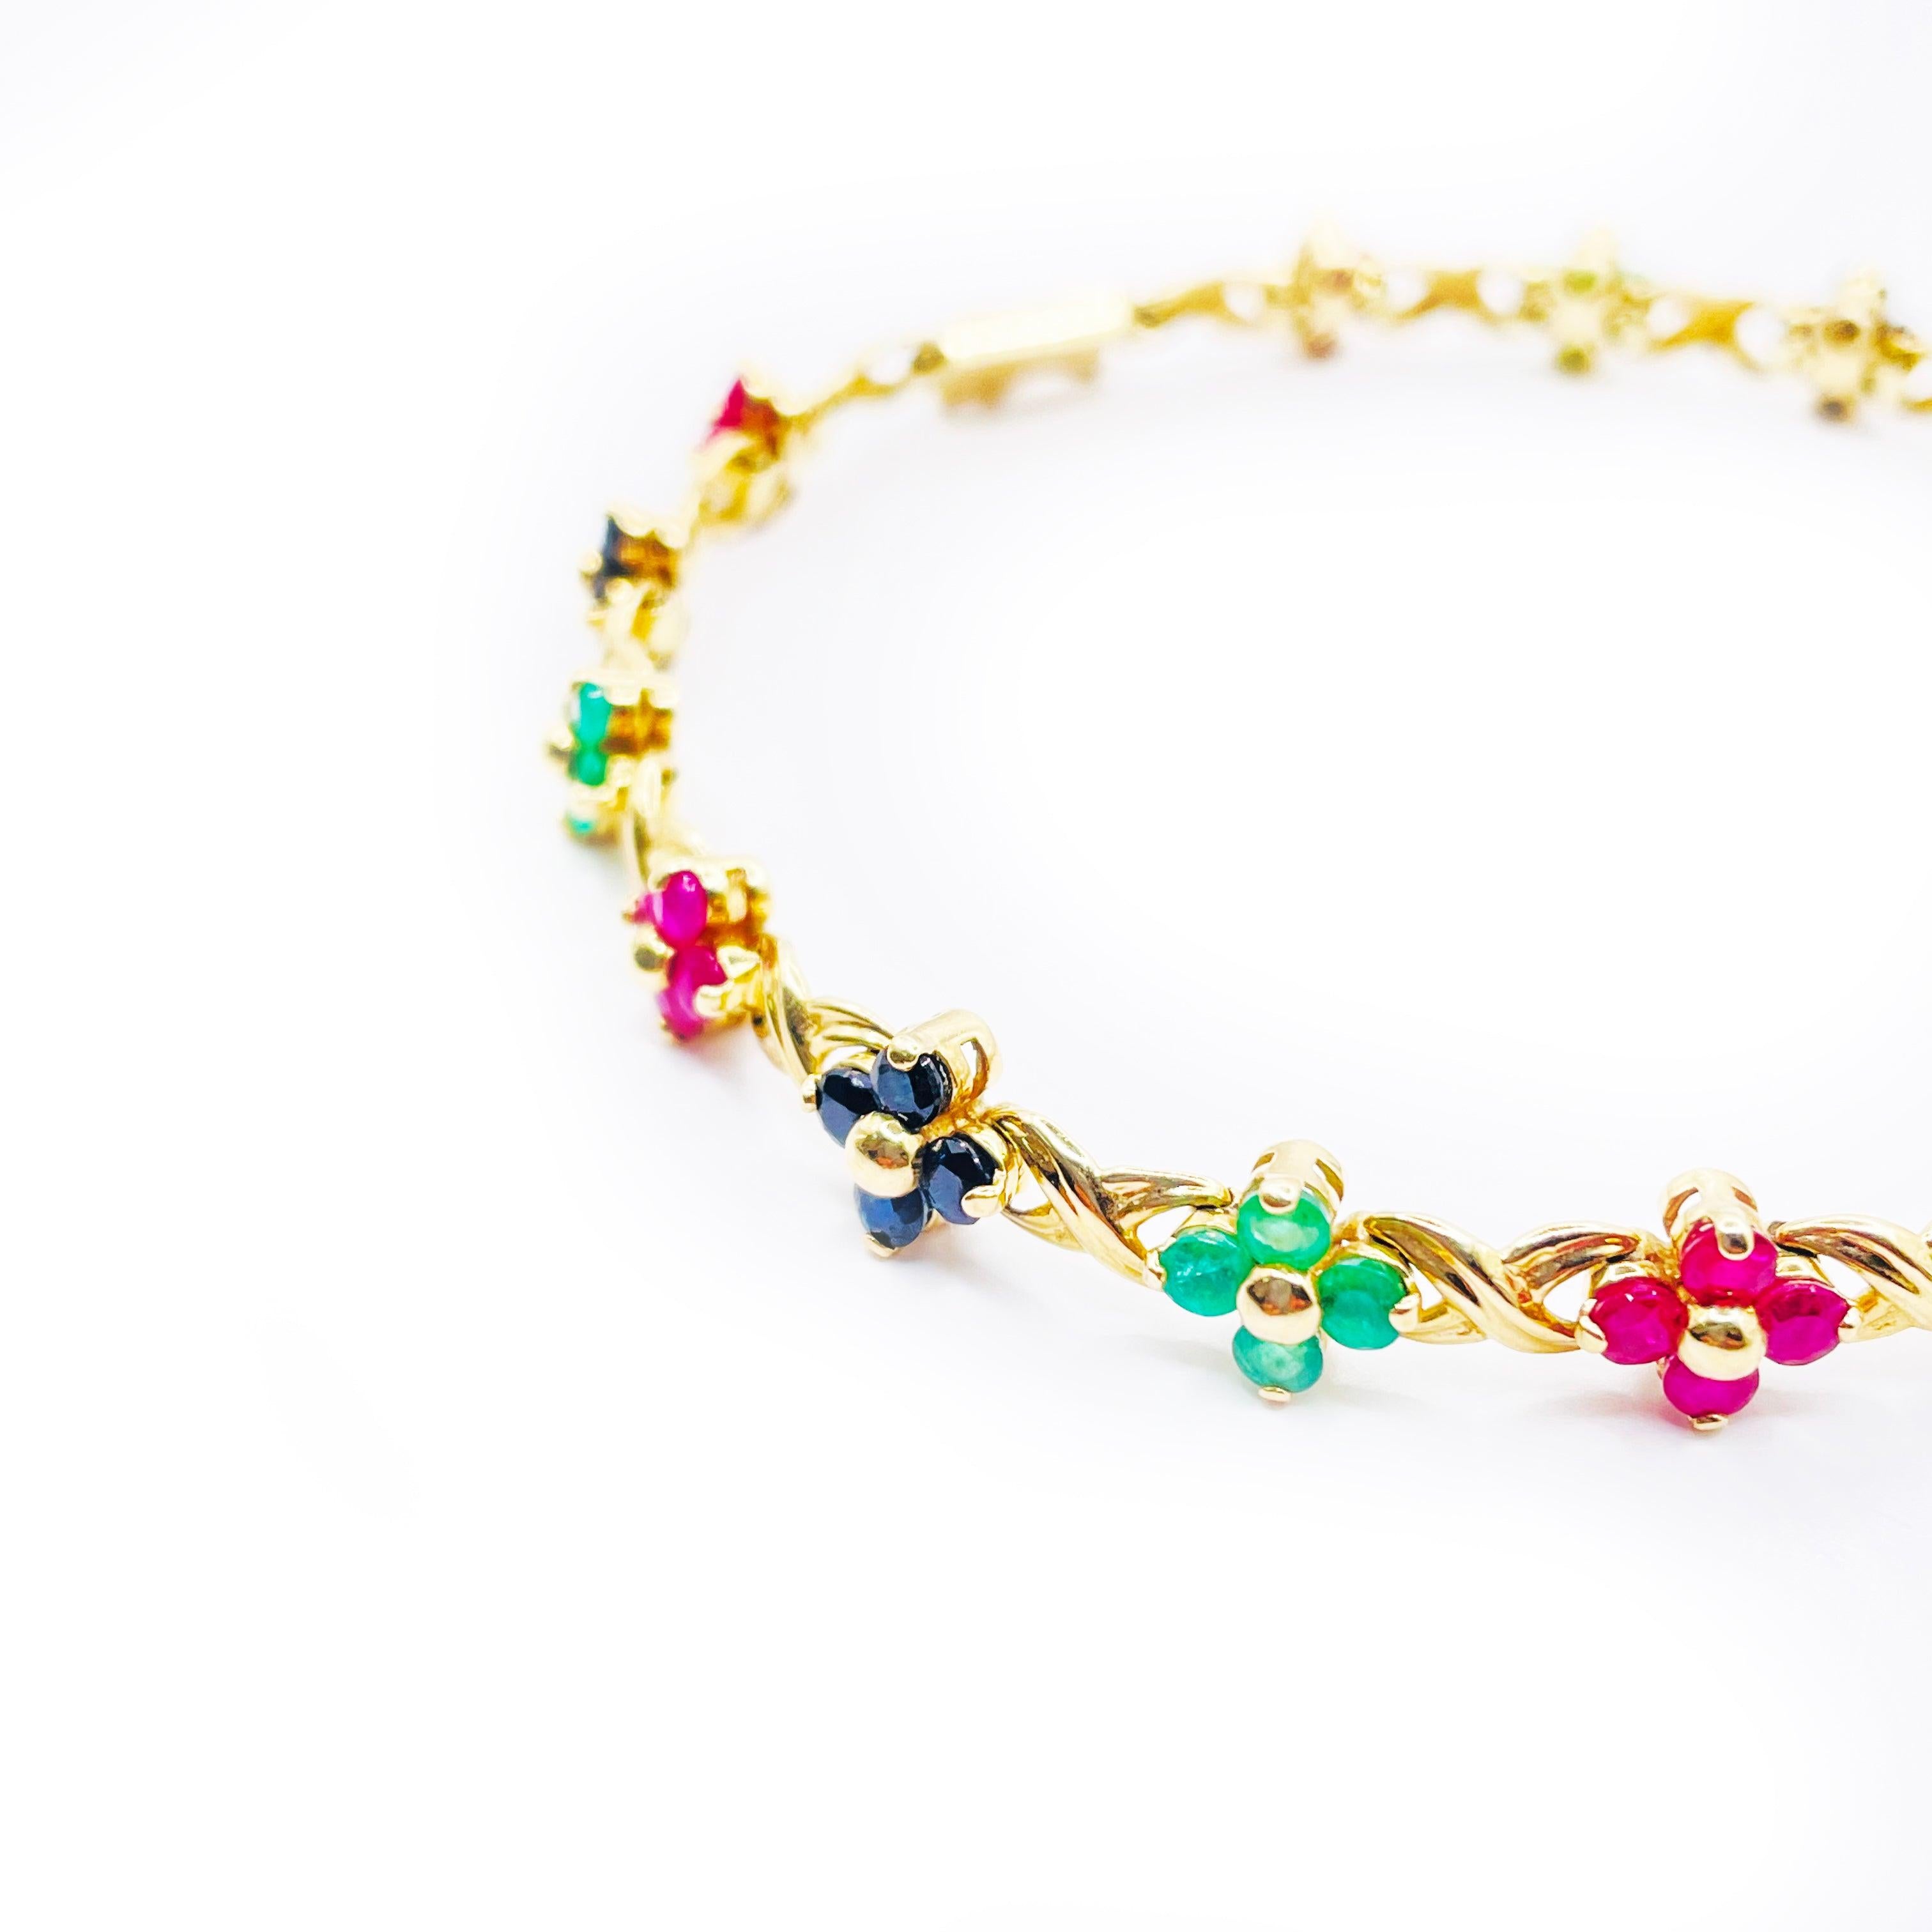 This stunning bracelet features a beautiful multicolor flower design, crafted from high-quality 14k white gold. 

The bracelet weighs 10.0g and features delicate flowers with intricate details and vibrant colors that add a touch of